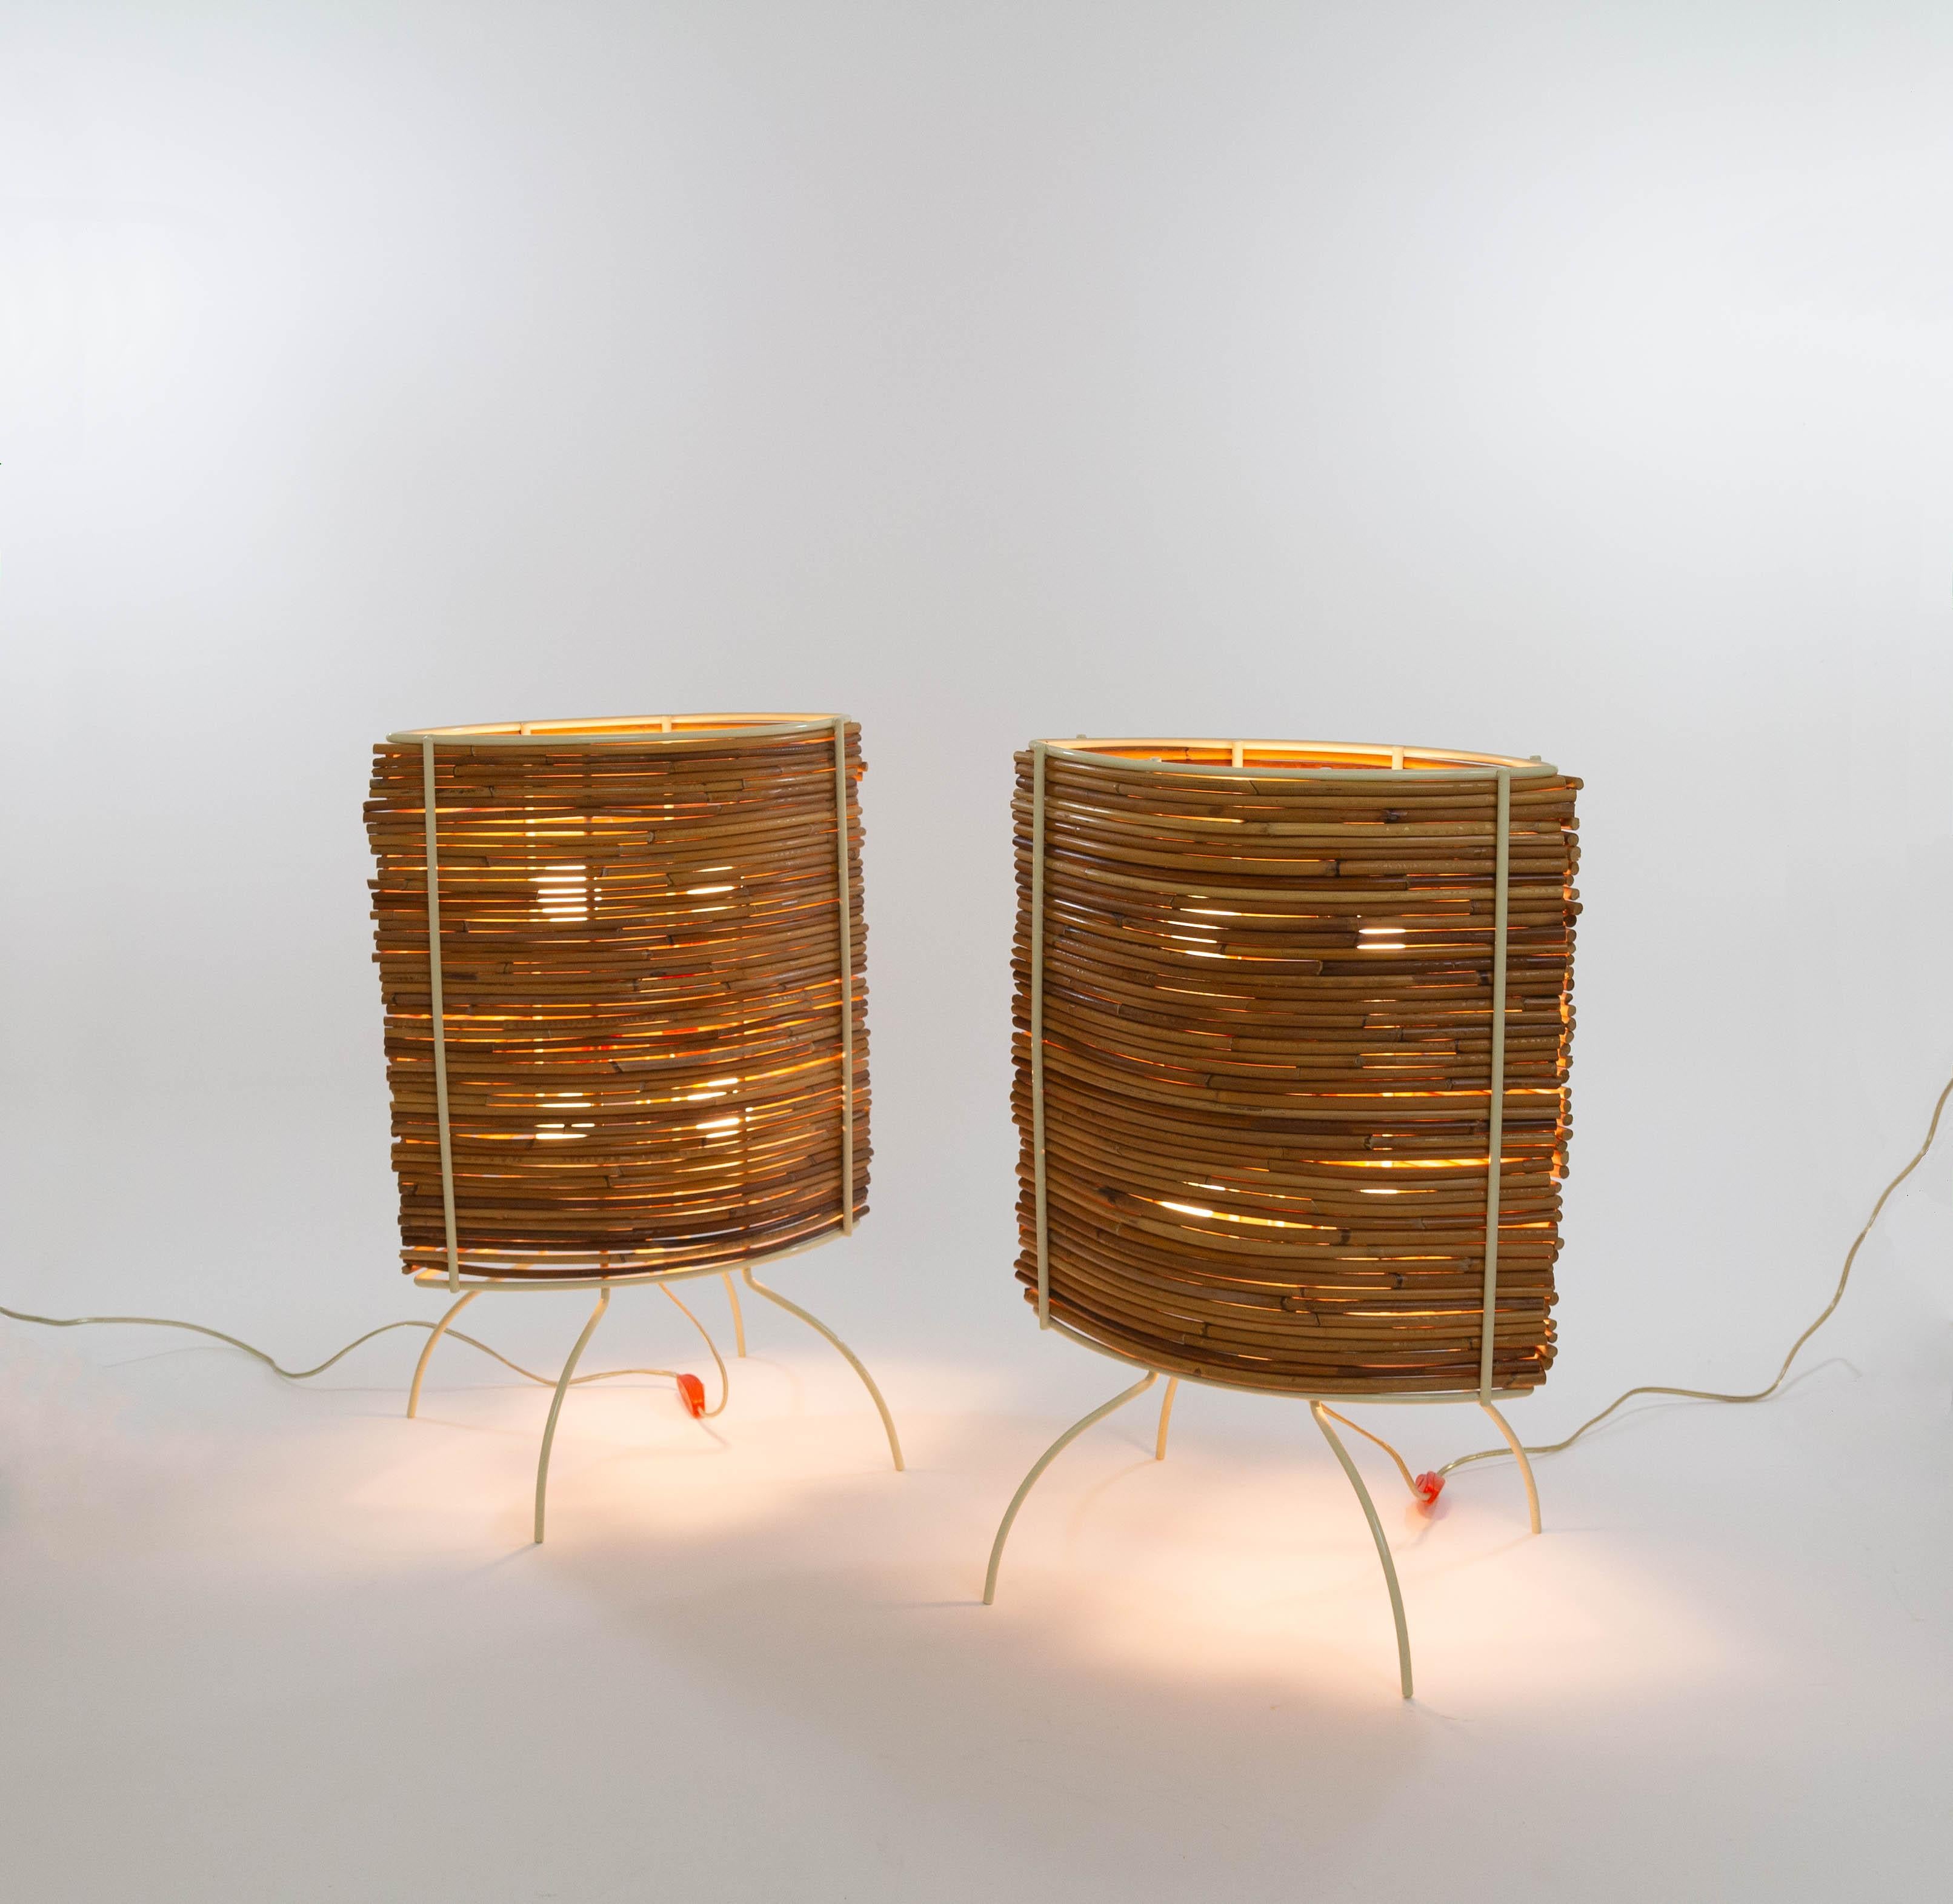 Modern Large Bambù table lamps by Humberto & Fernando Campana for Candle, 2000s For Sale